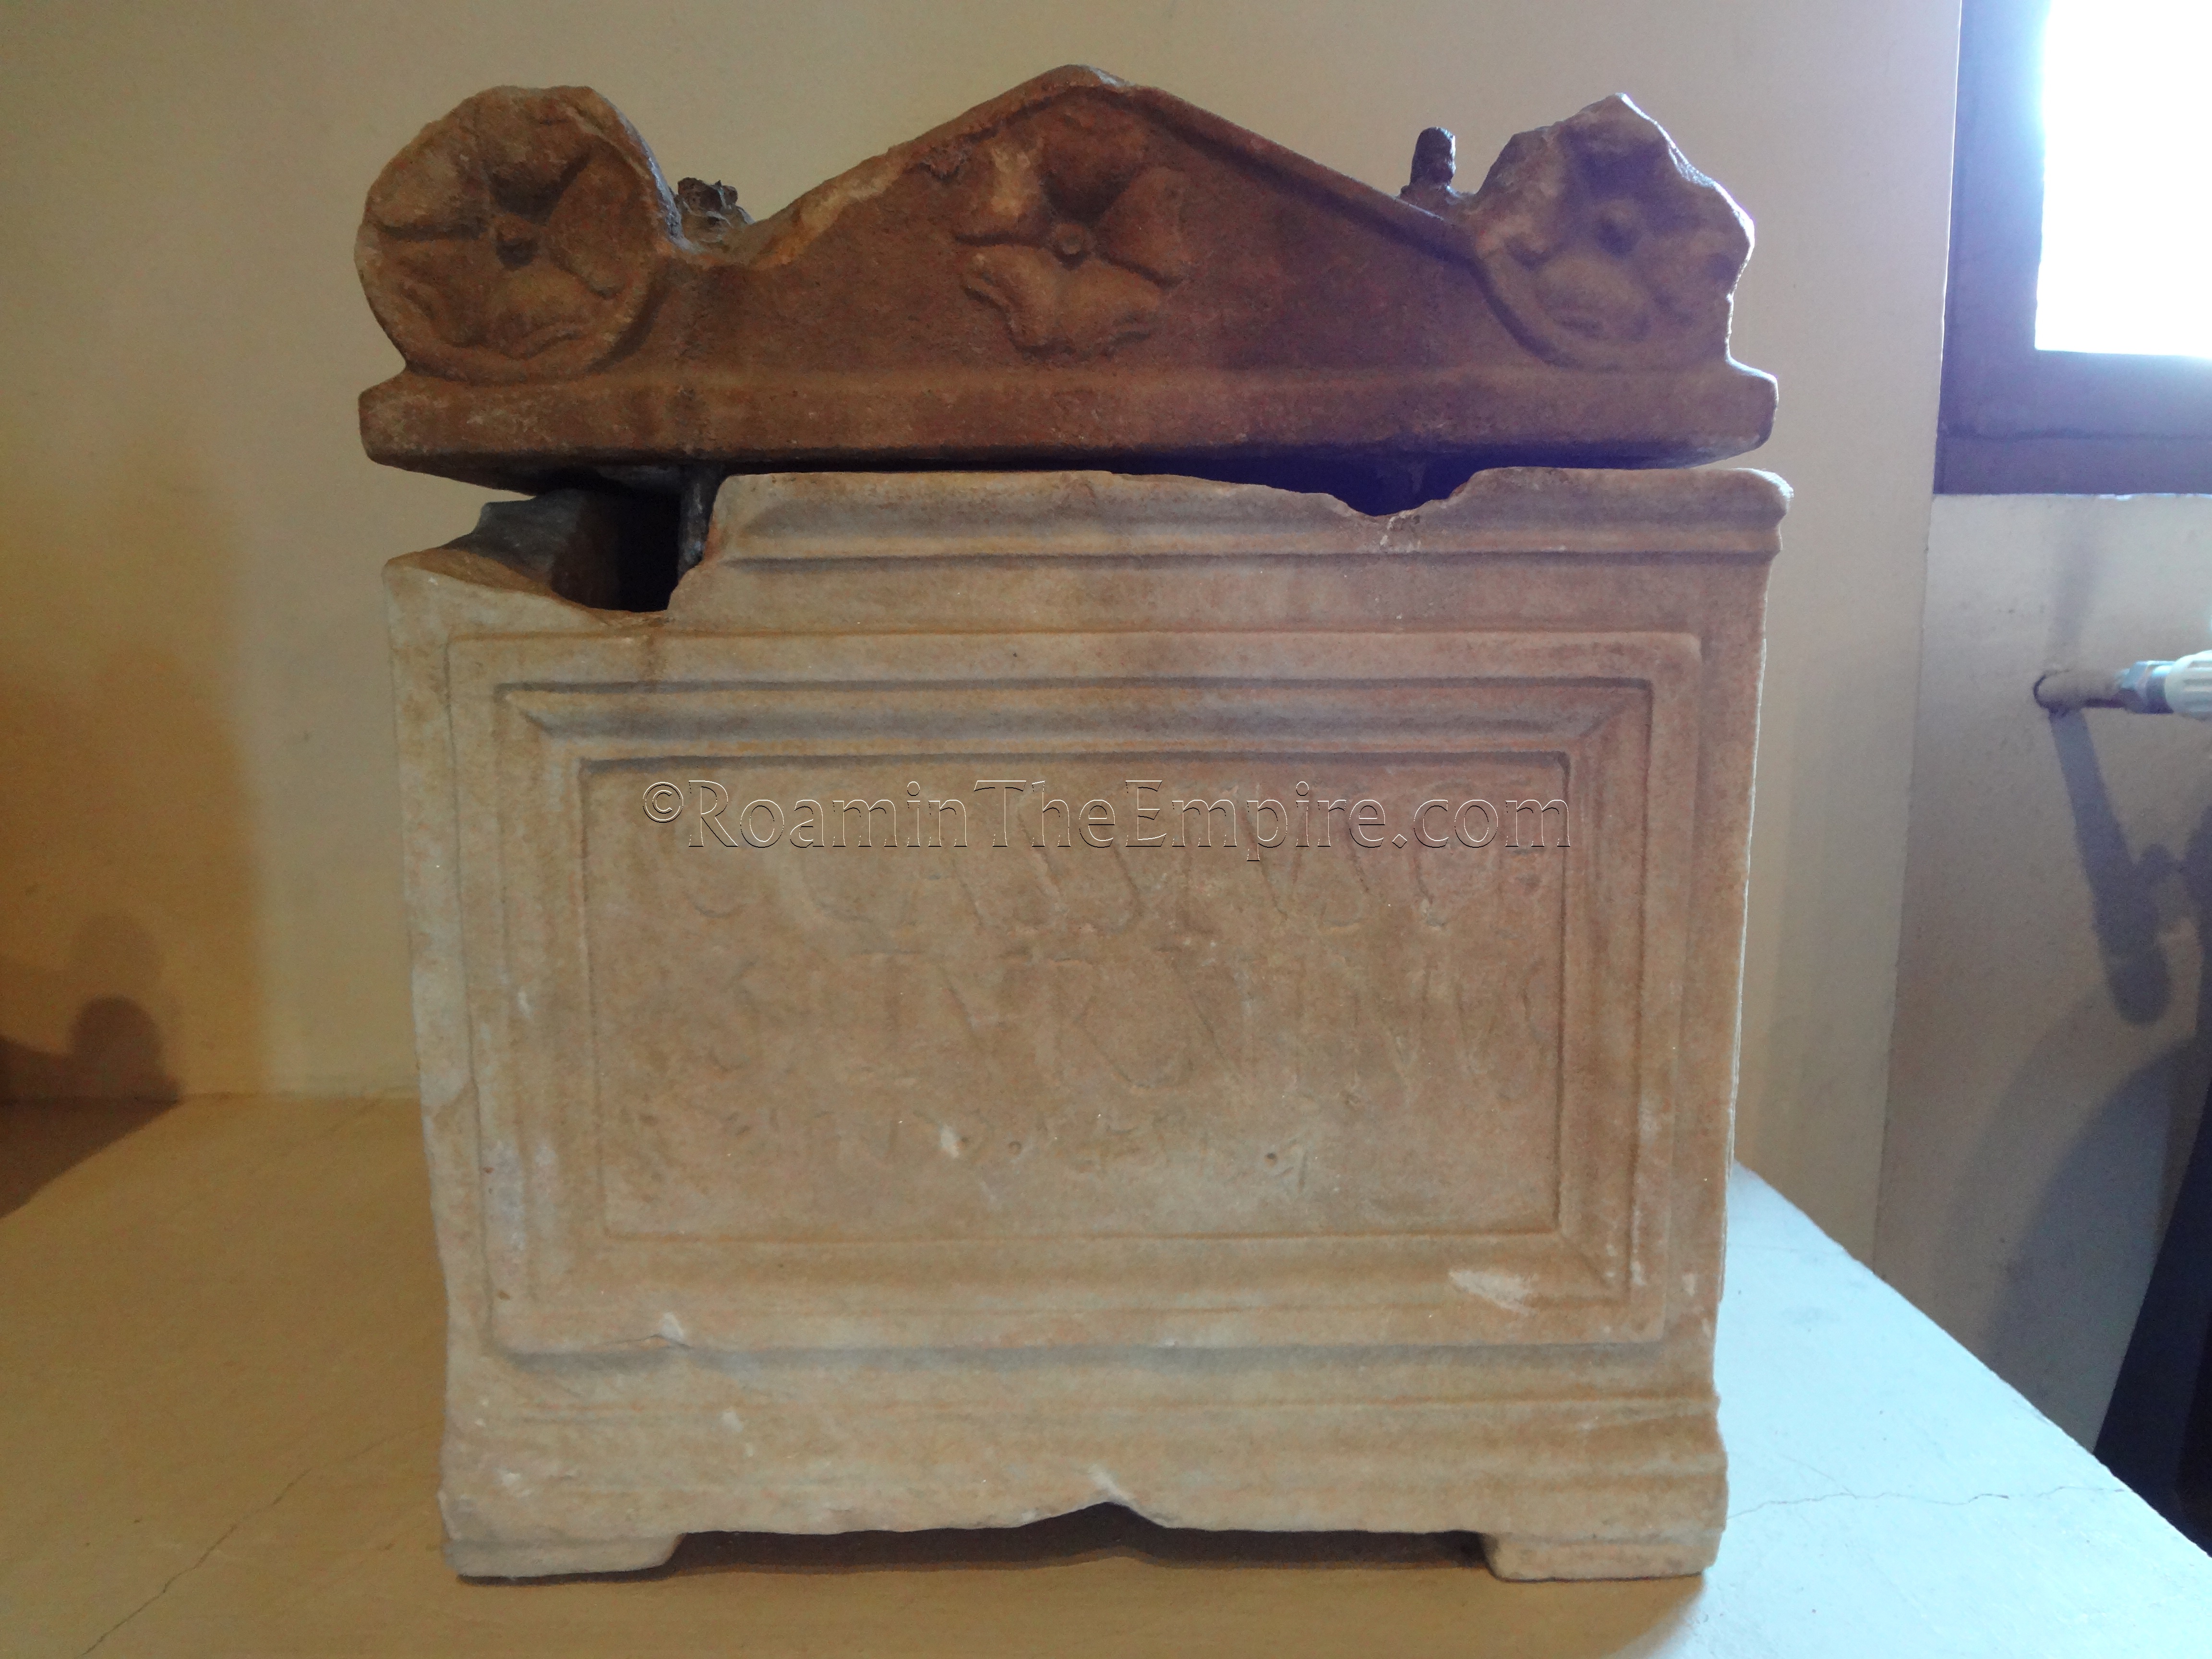 Funerary urn of Gaius Cassius with Latin and Etruscan inscription.